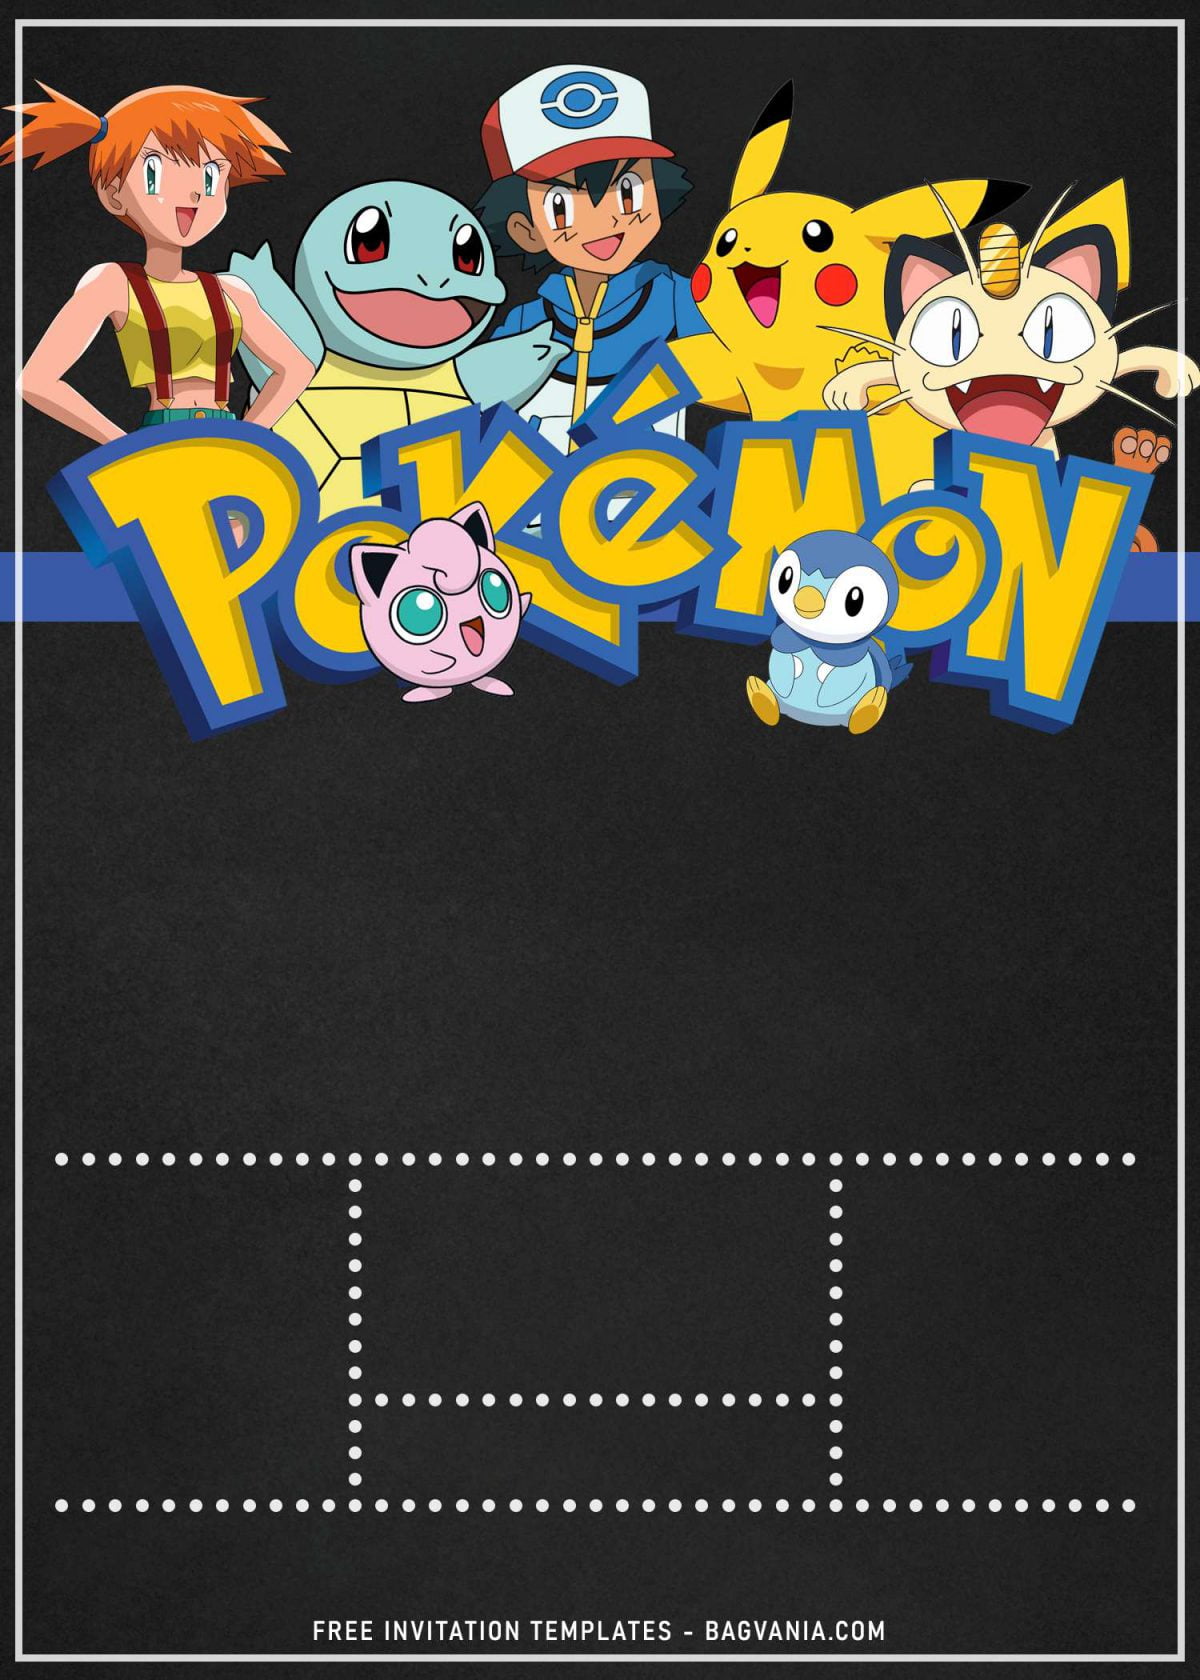 11+ Awesome Pokemon Chalkboard Invitation Templates For Boys Birthday Party and has Jiggly Puff